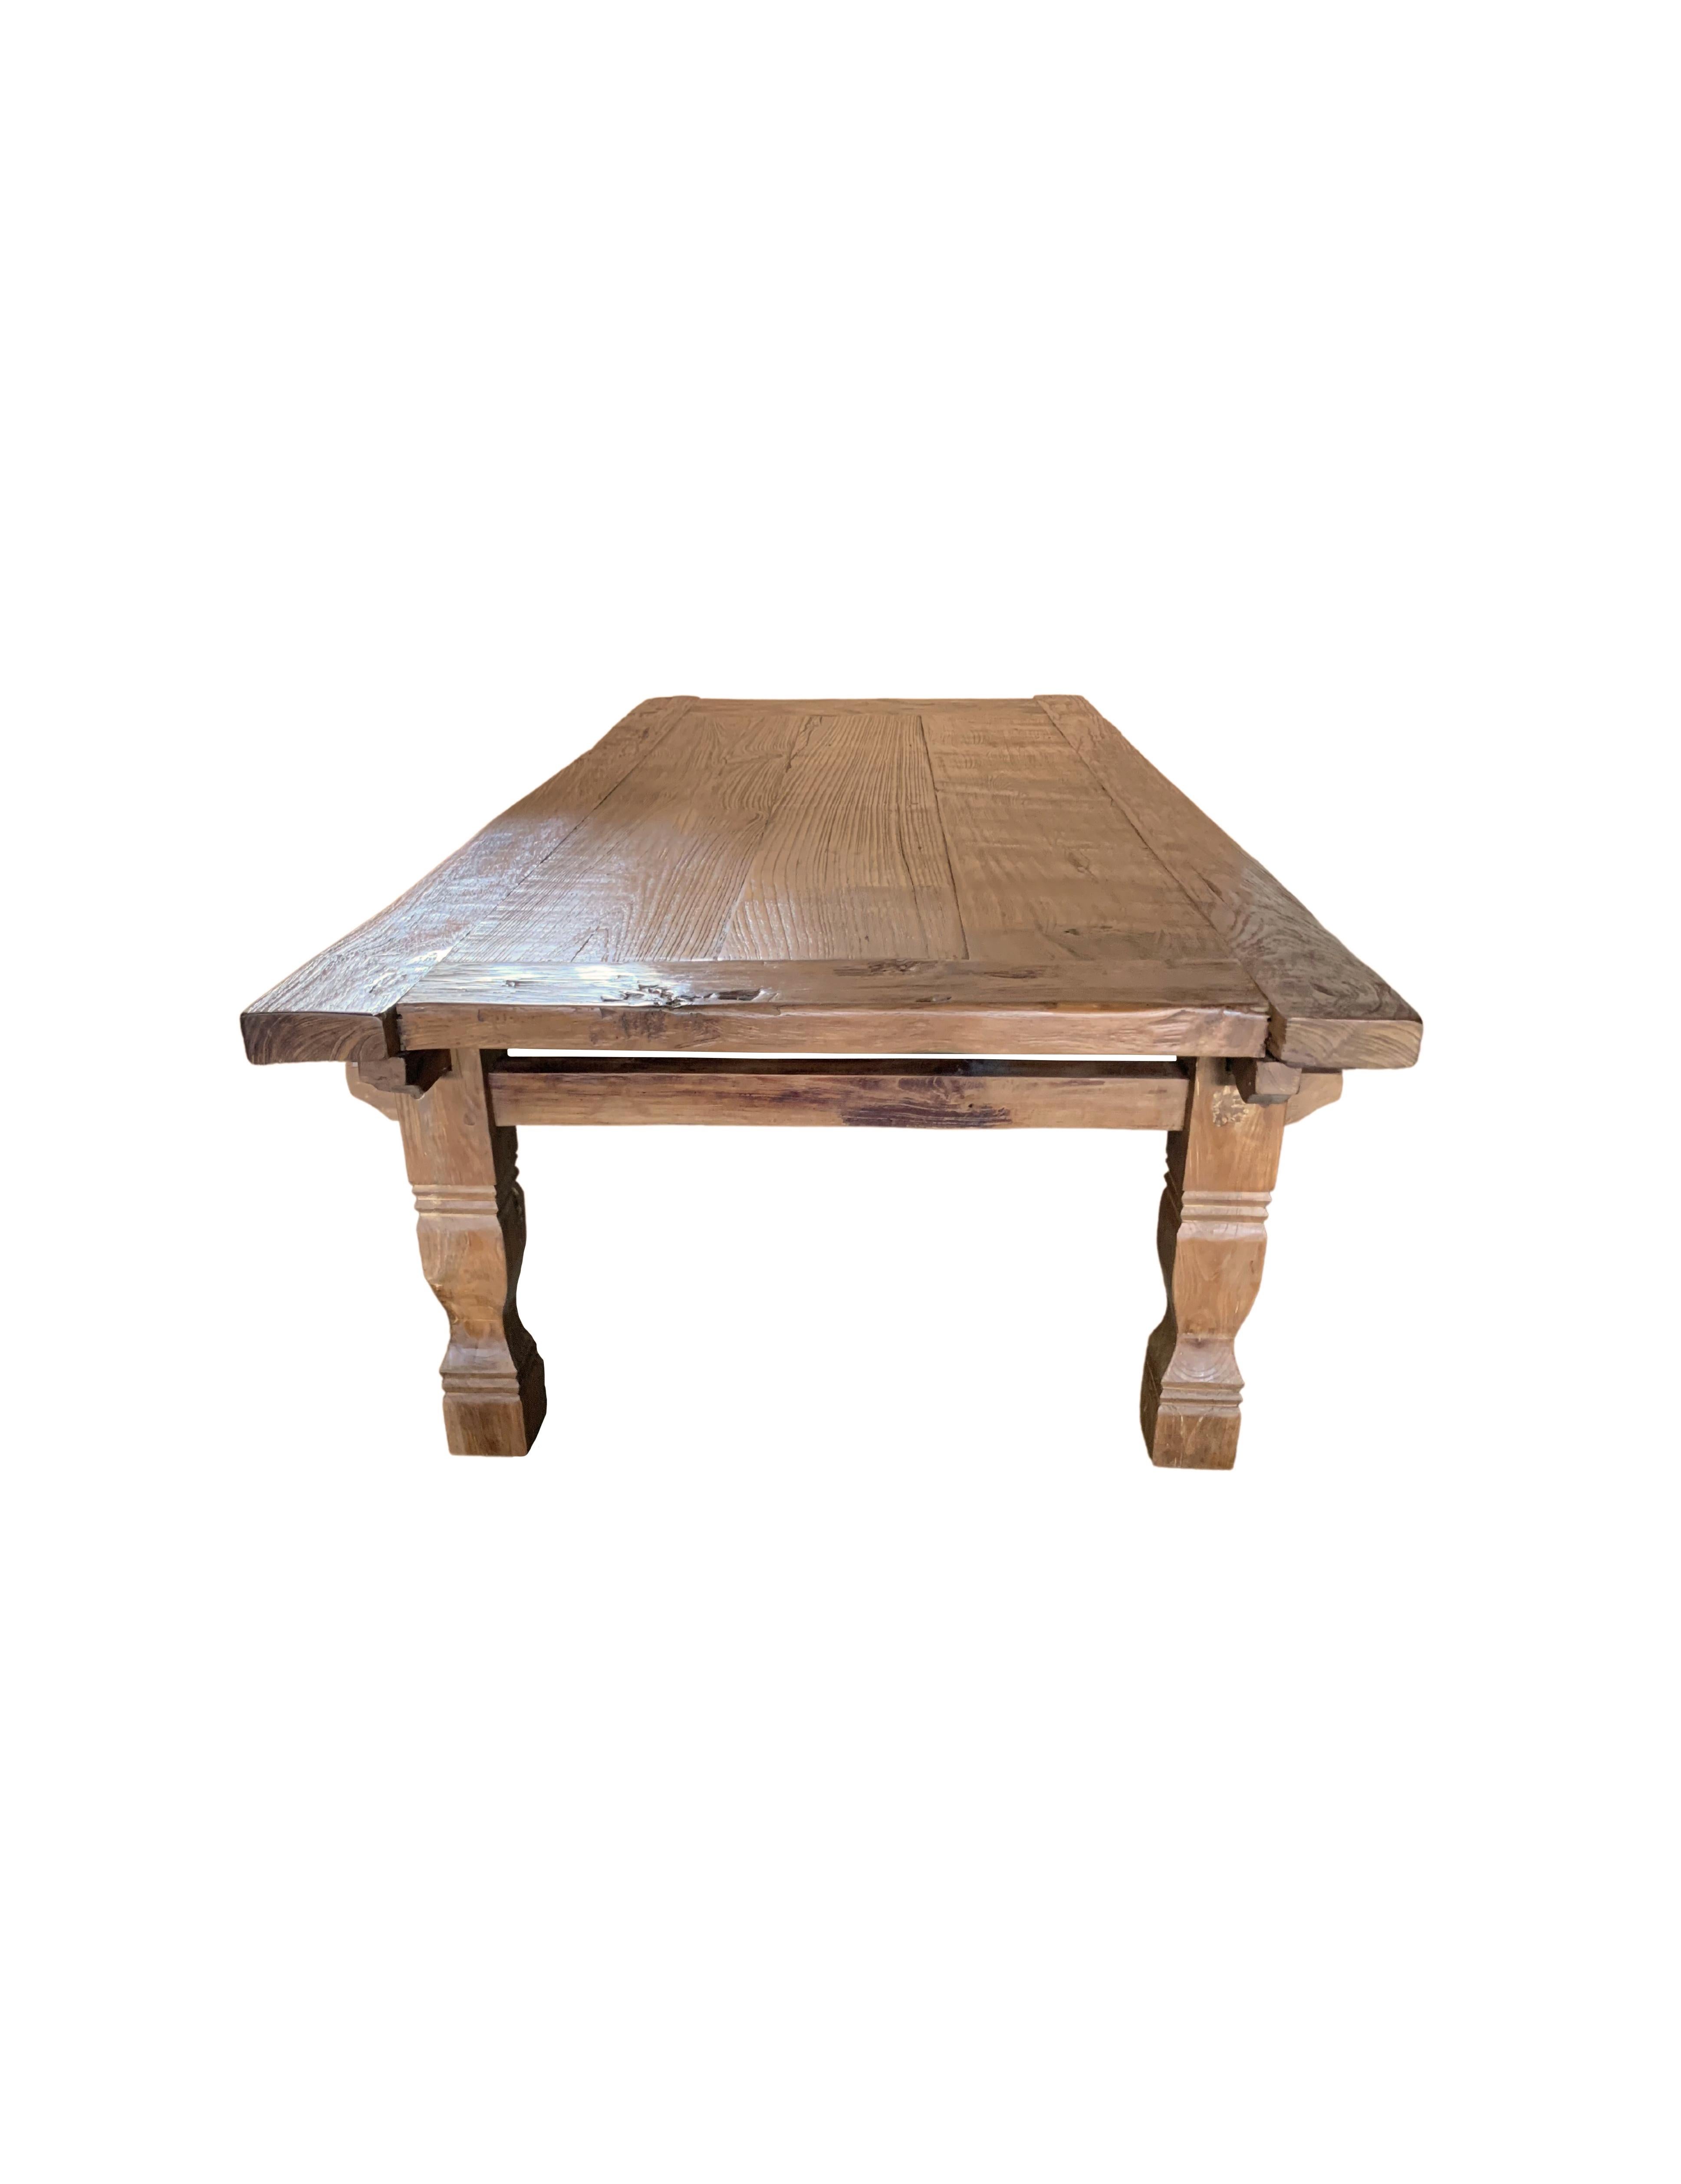 Hand-Crafted Vintage Teak Wood Weavers Table with Hand-Carved Detail, Java, Indonesia